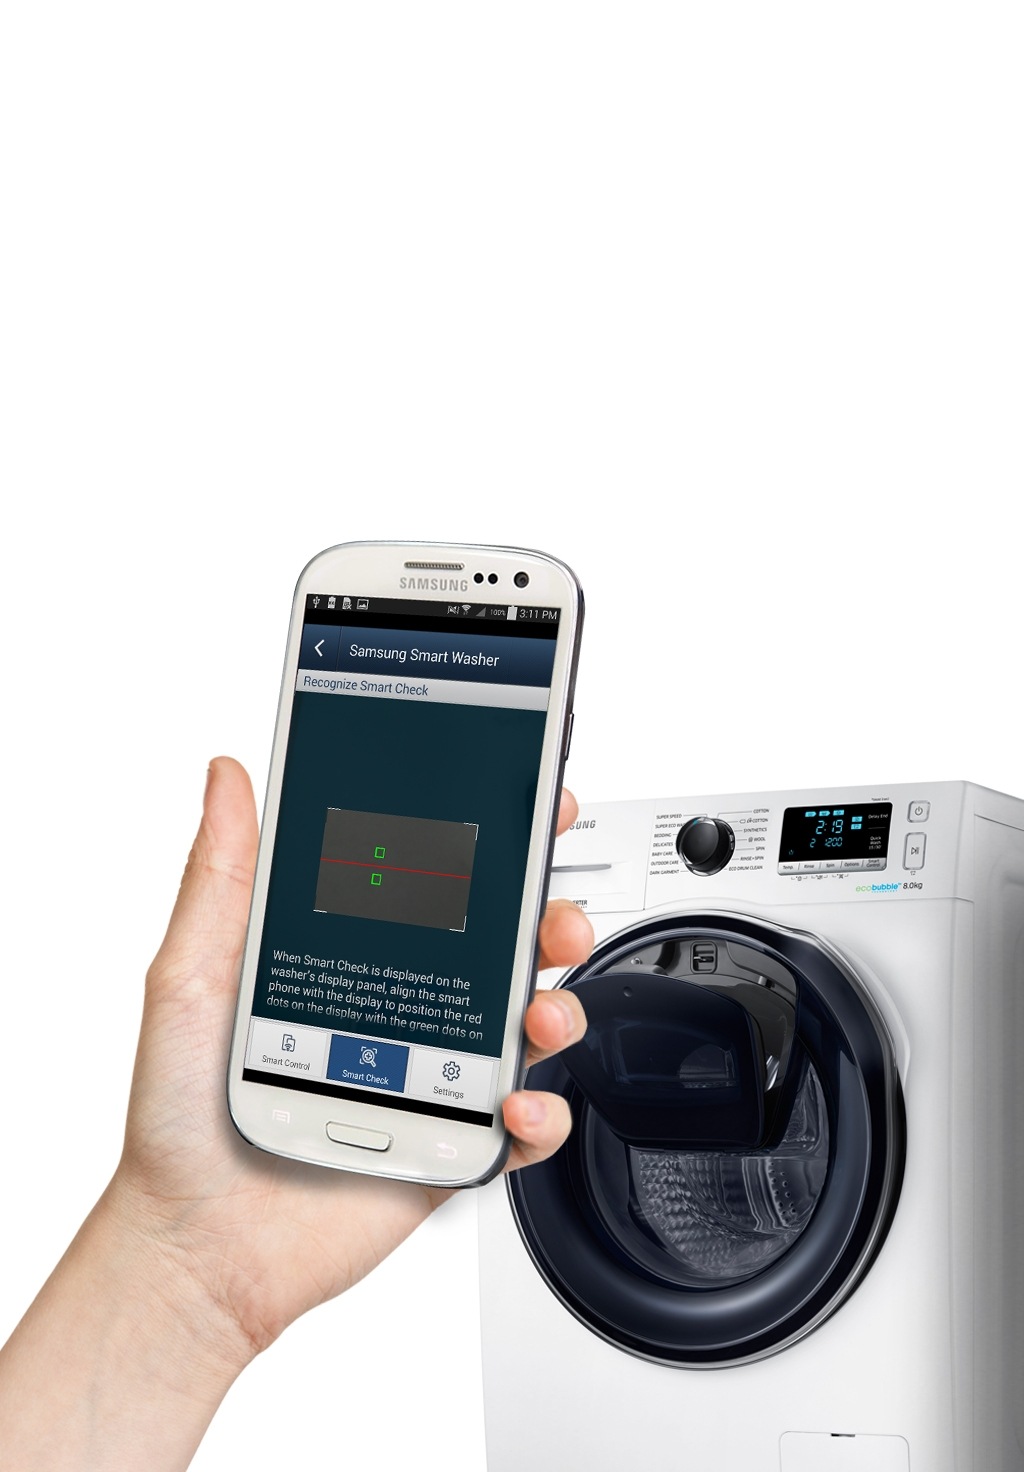 An image showing a user diagnosing washing machine issues on their smartphone next to a WW6500 machine.